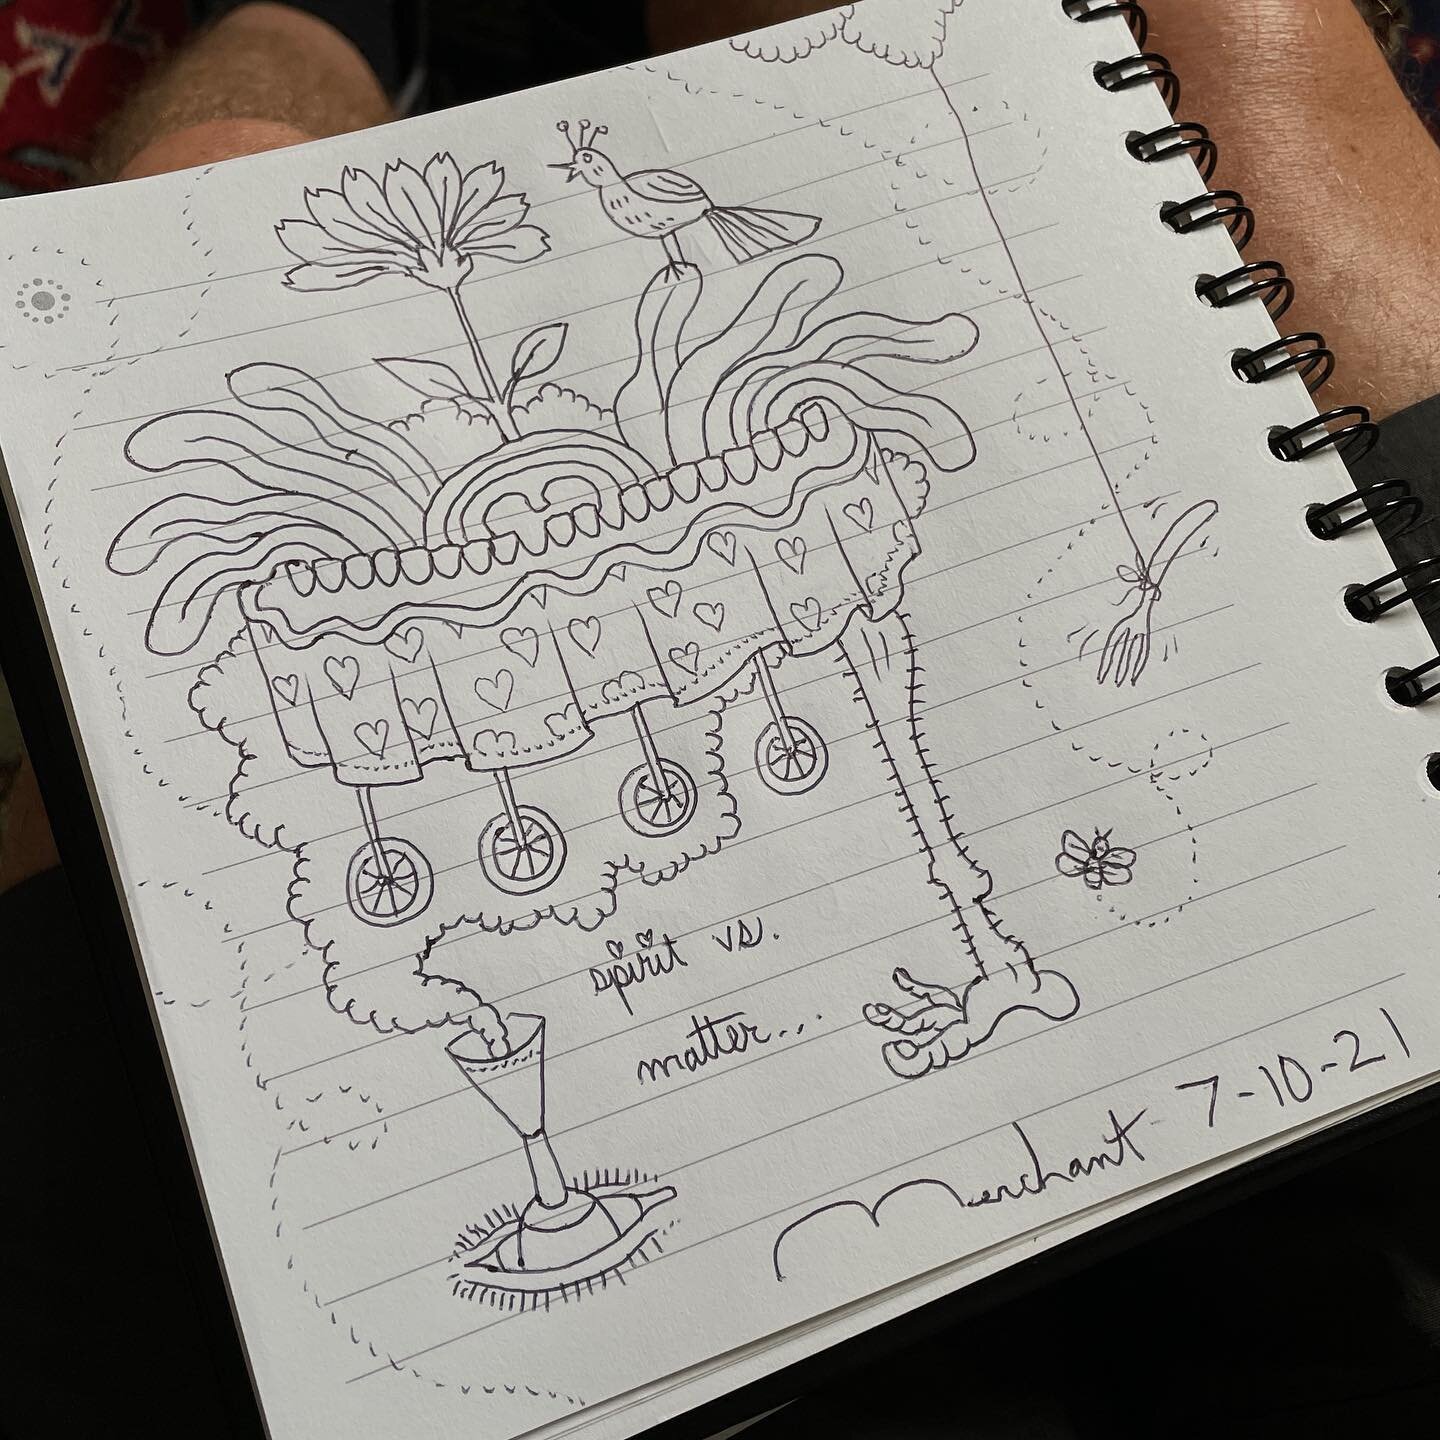 Hey there, all you gutwrenching-globetrotter-gallbladder-guestbooks!🤔🤣🥴
&bull;
So this is how it looks when I sign your guestbook&hellip; Hope they didn&rsquo;t mind?😬🤫🙀
&bull;
Anybody else like to doodle?🧐Hope you&rsquo;re happy and healthy o